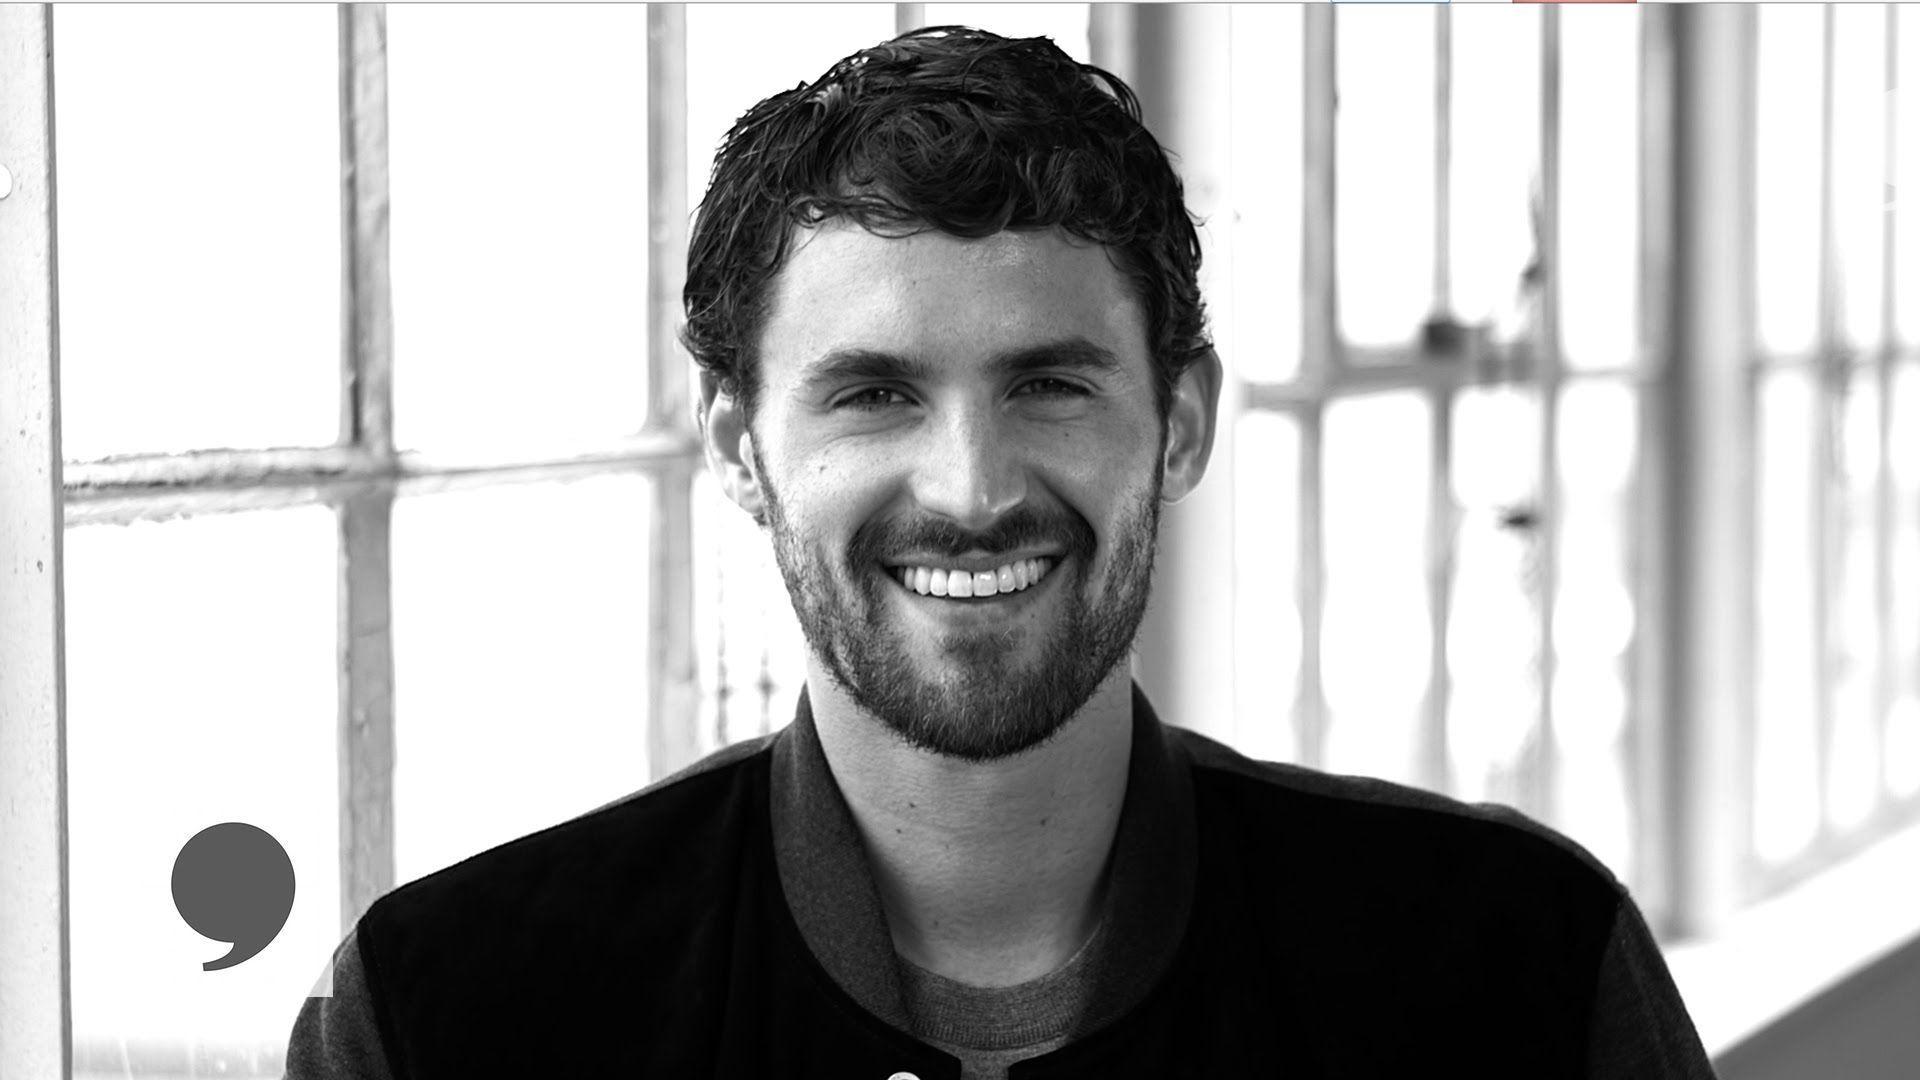 Kevin Love What You Love: Players&; POV